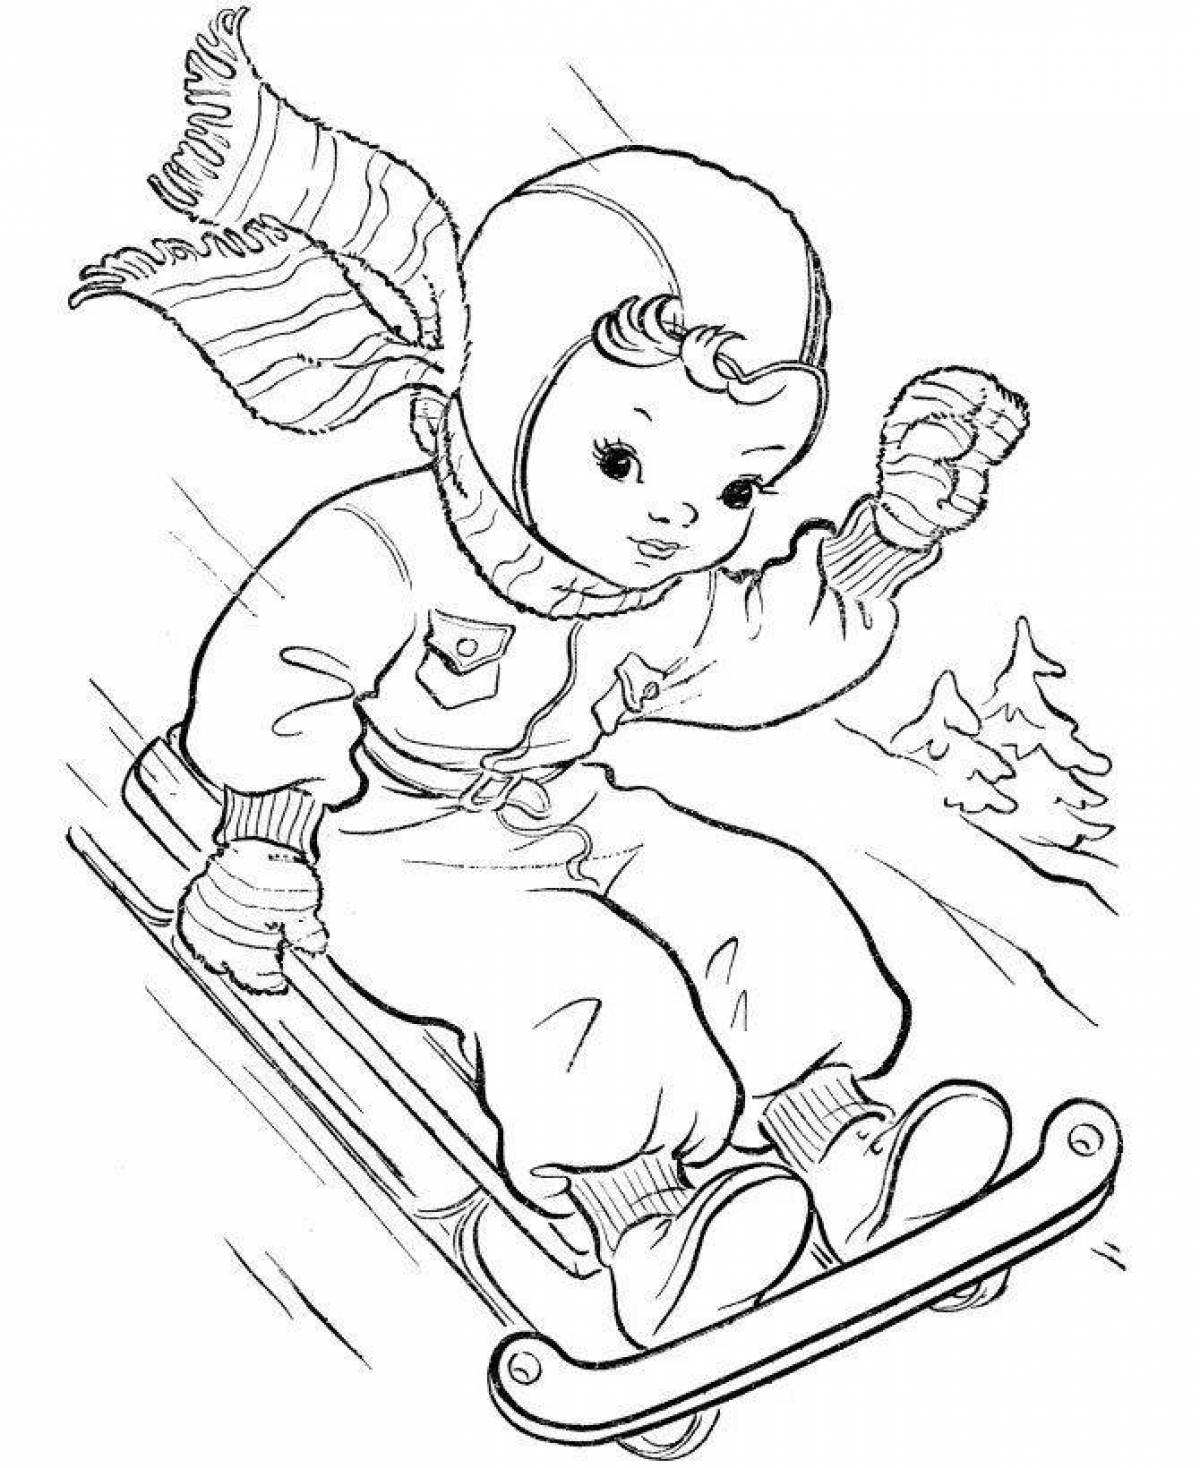 Coloring book glowing children sledding